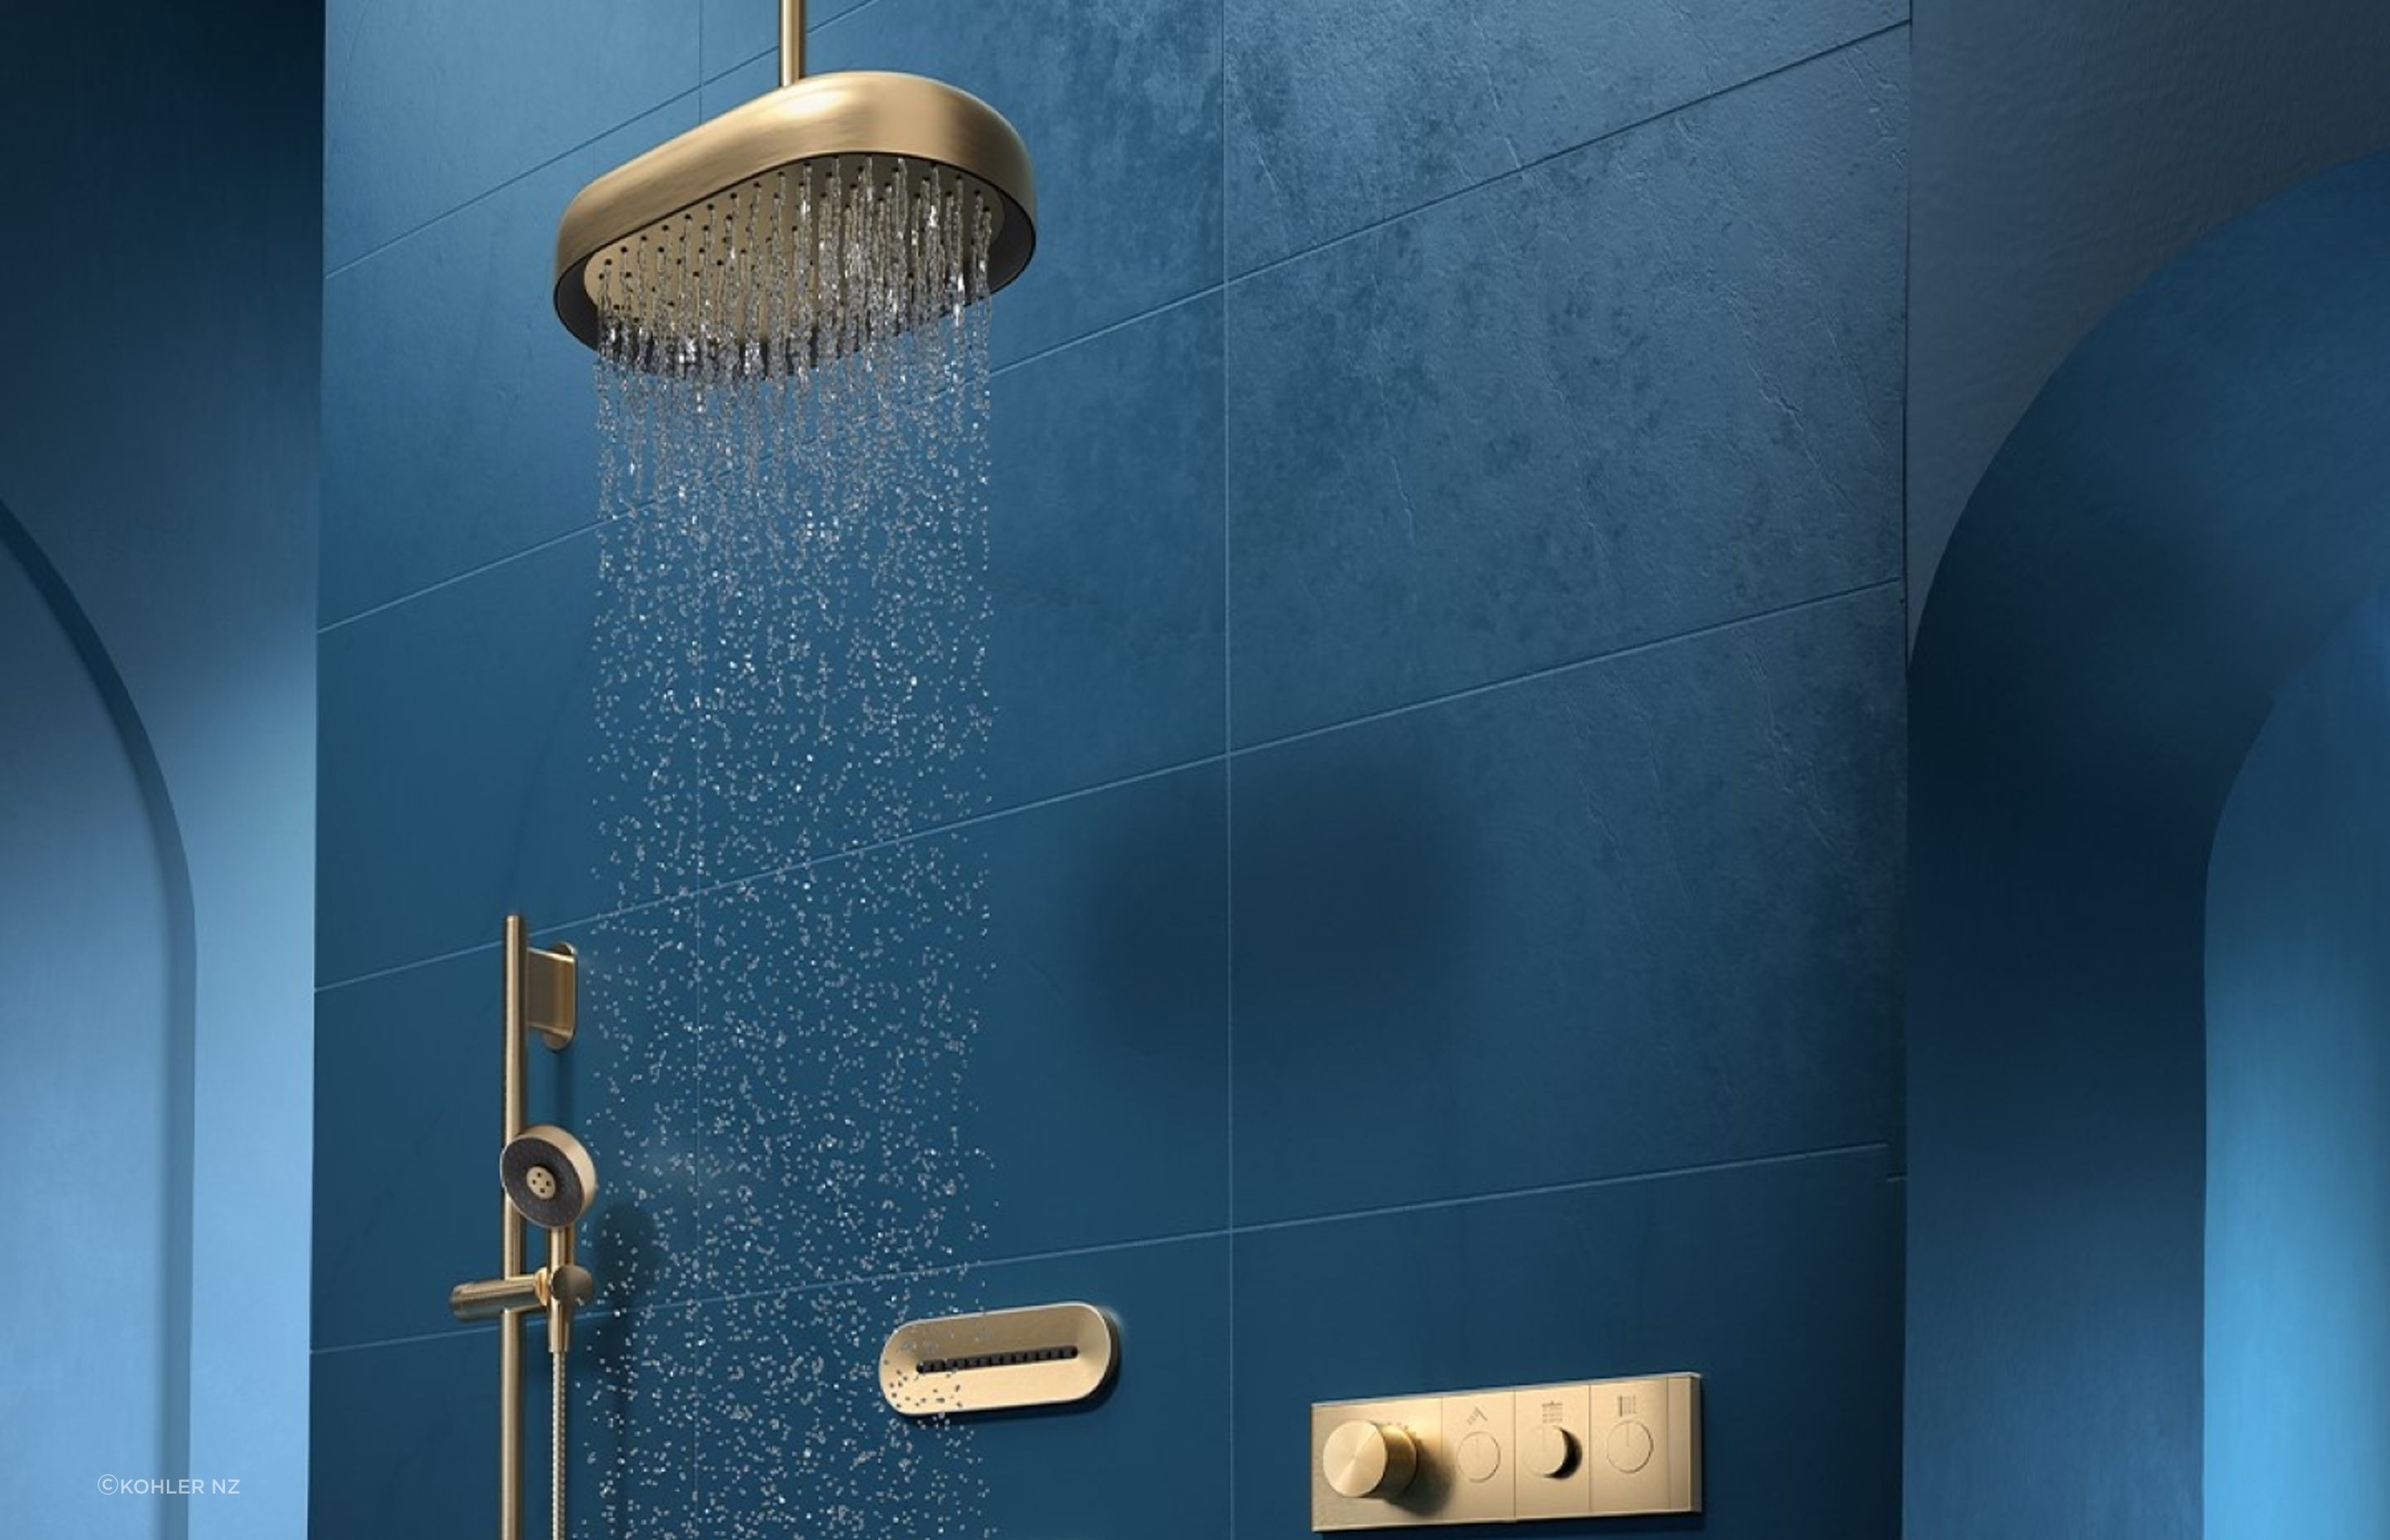 There are some fantastic shower head designs to consider like these as part of the Statement and Anthem Showering Collection.